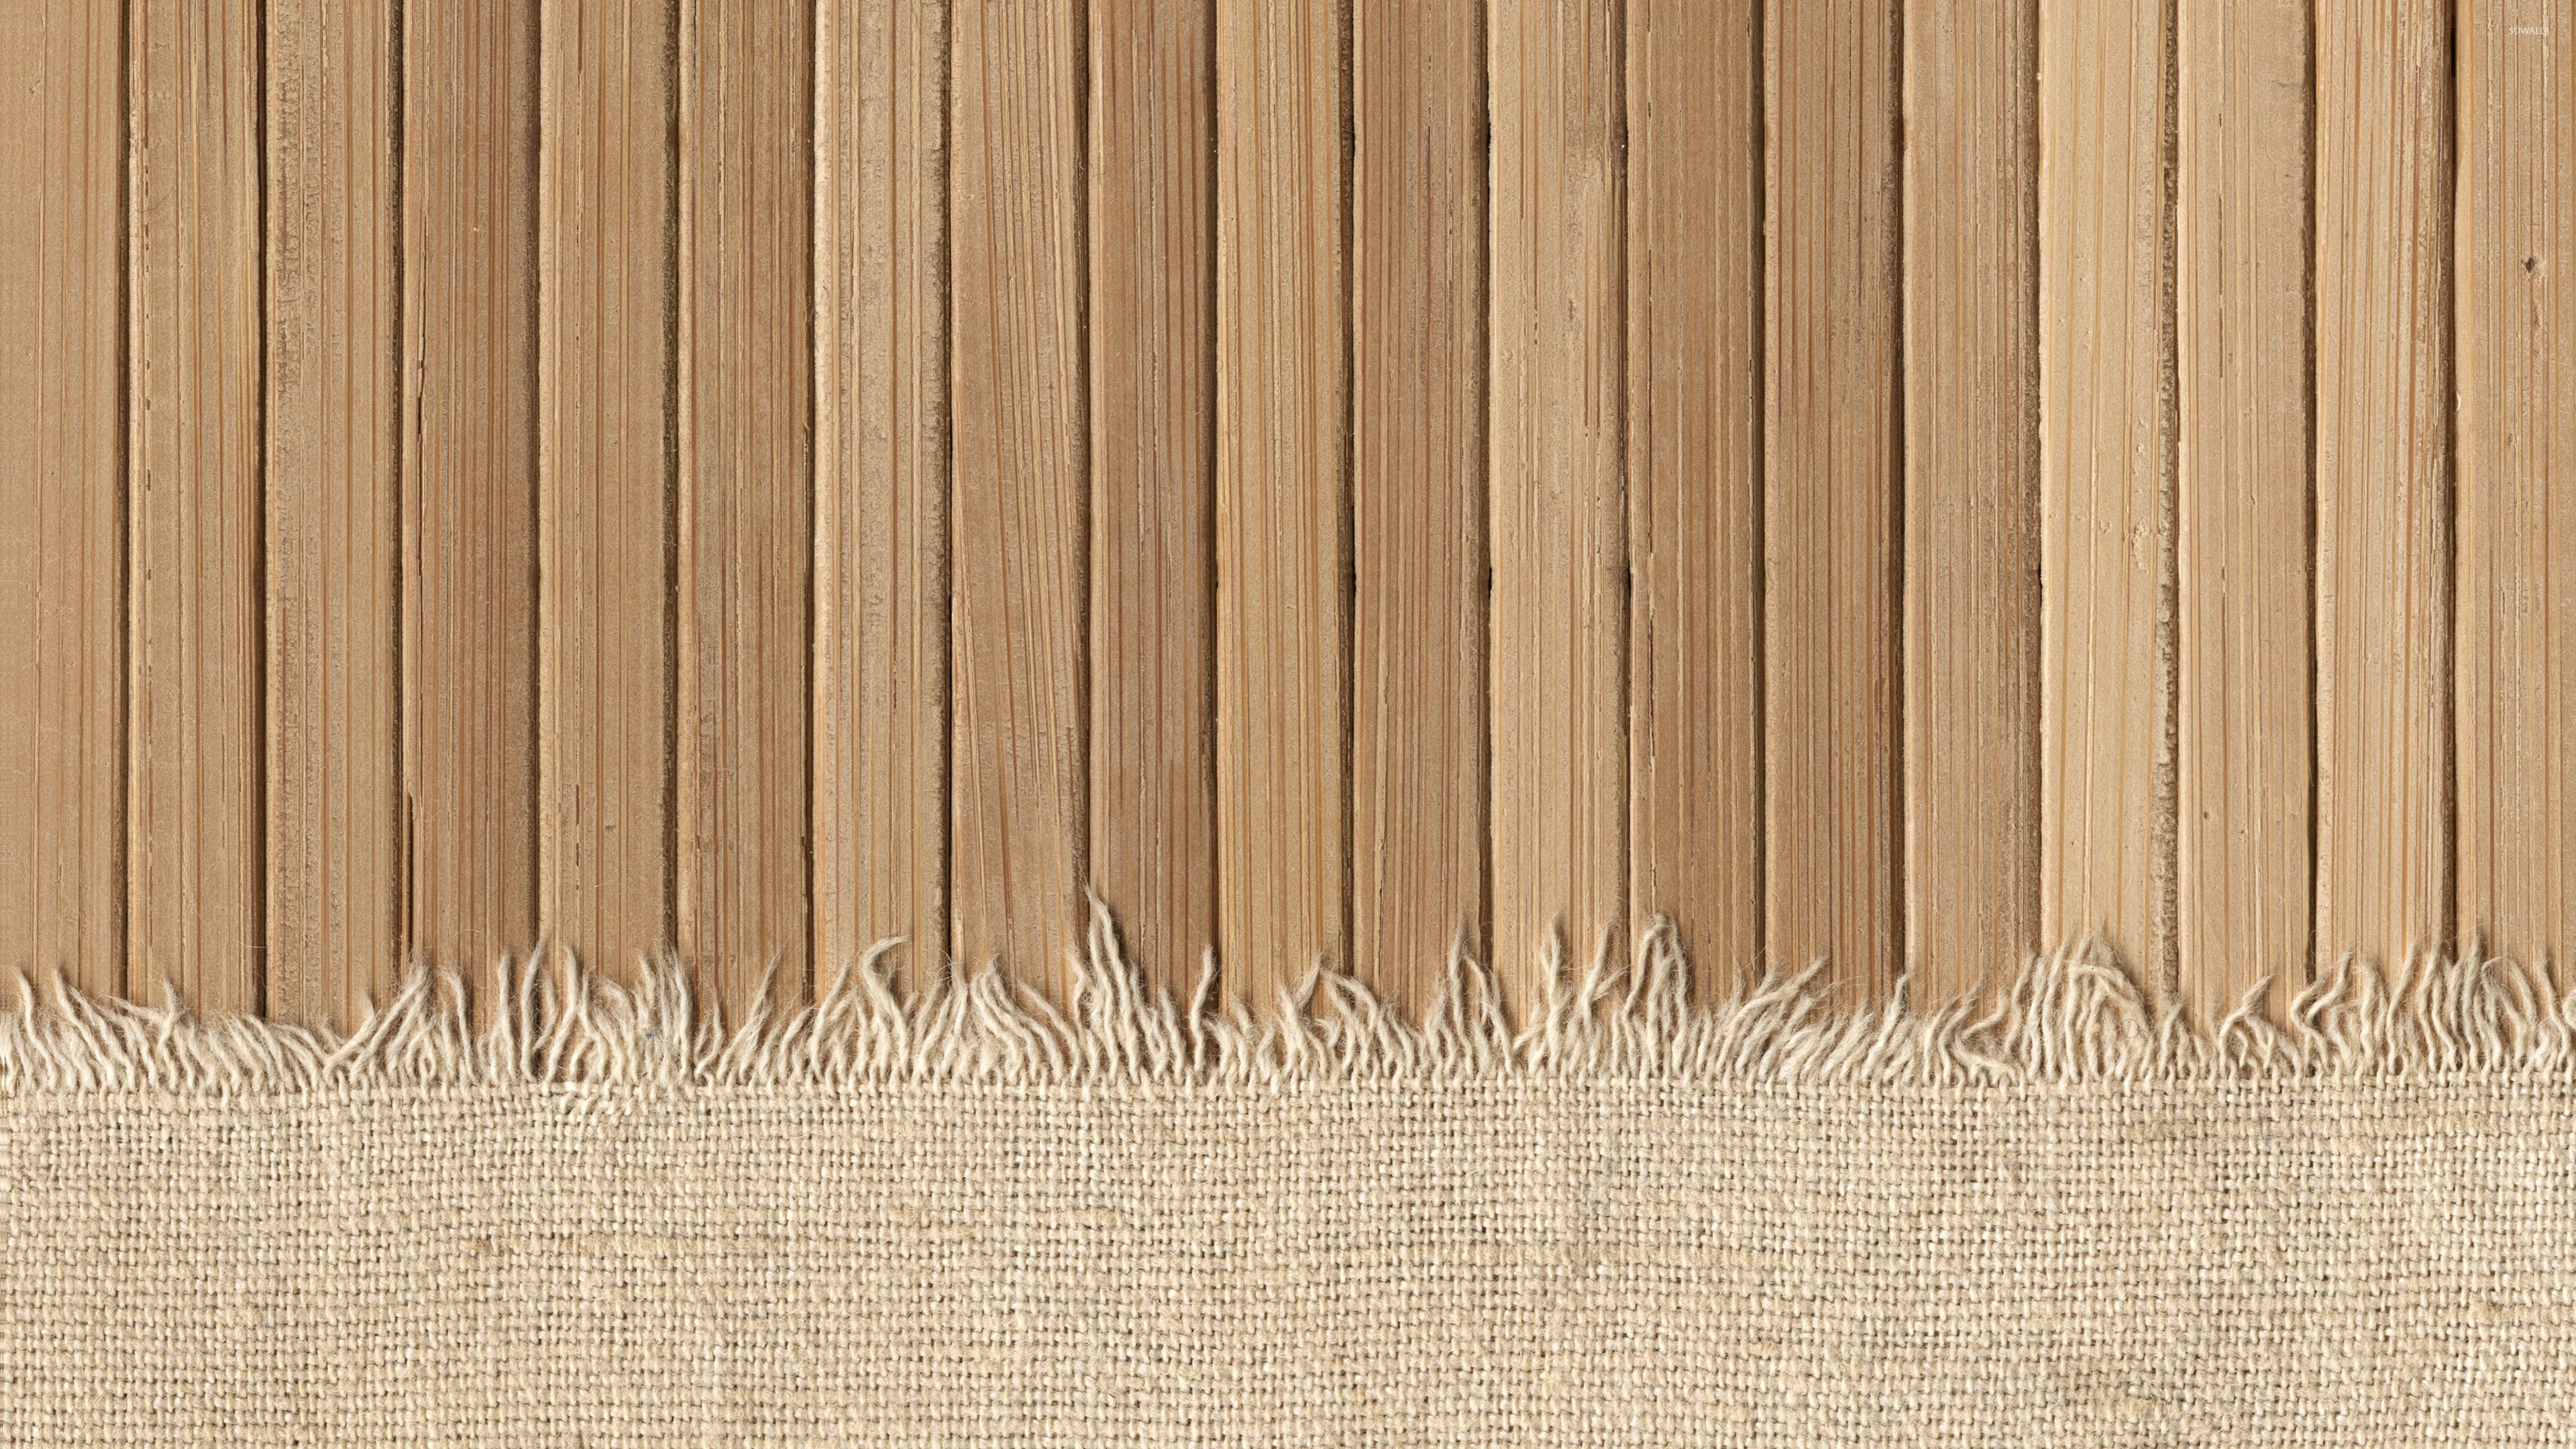 Knit fabric covering the wooden panels wallpaper